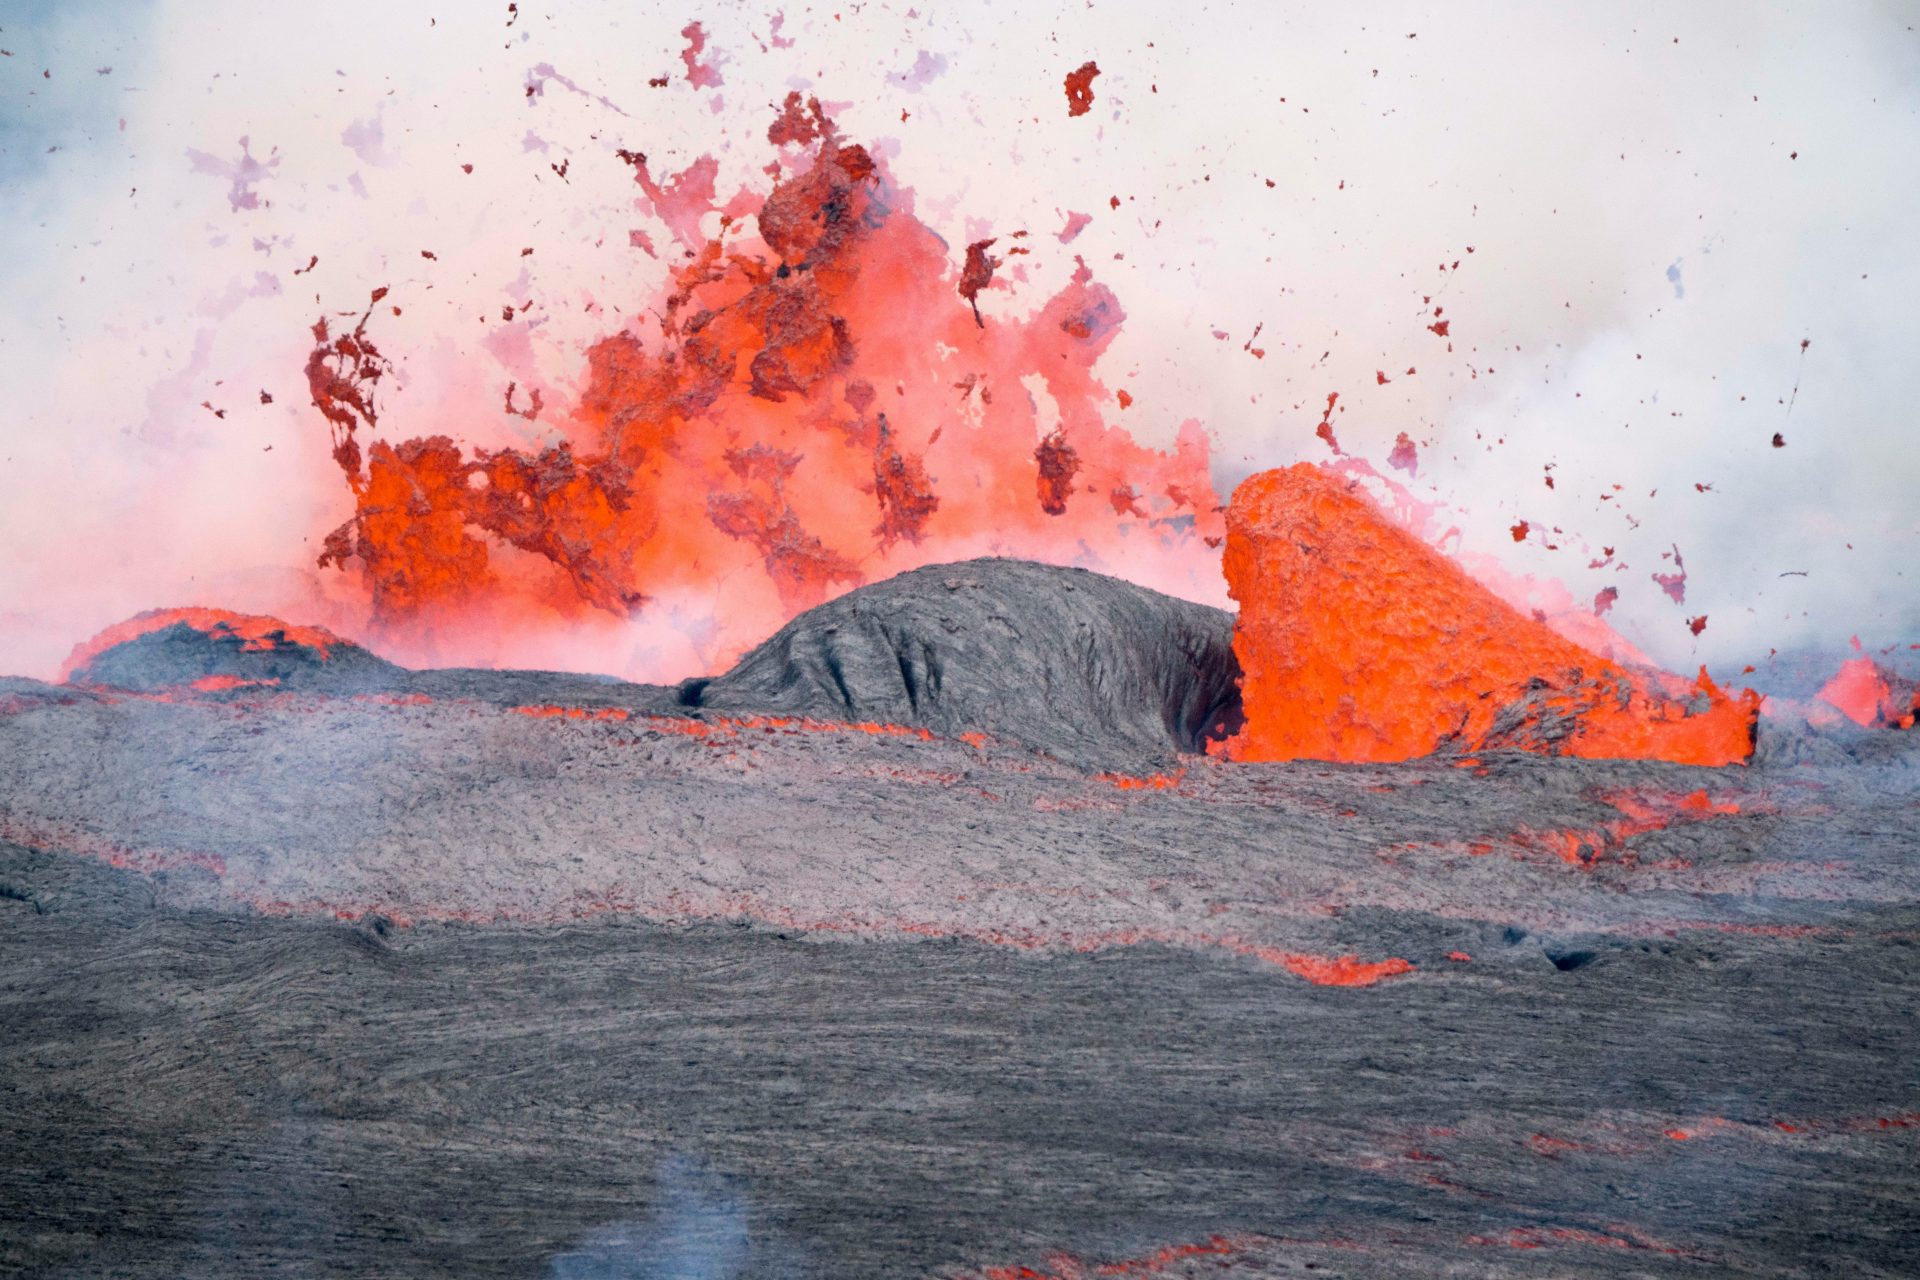 Chemicals influenced by volcanic rock 